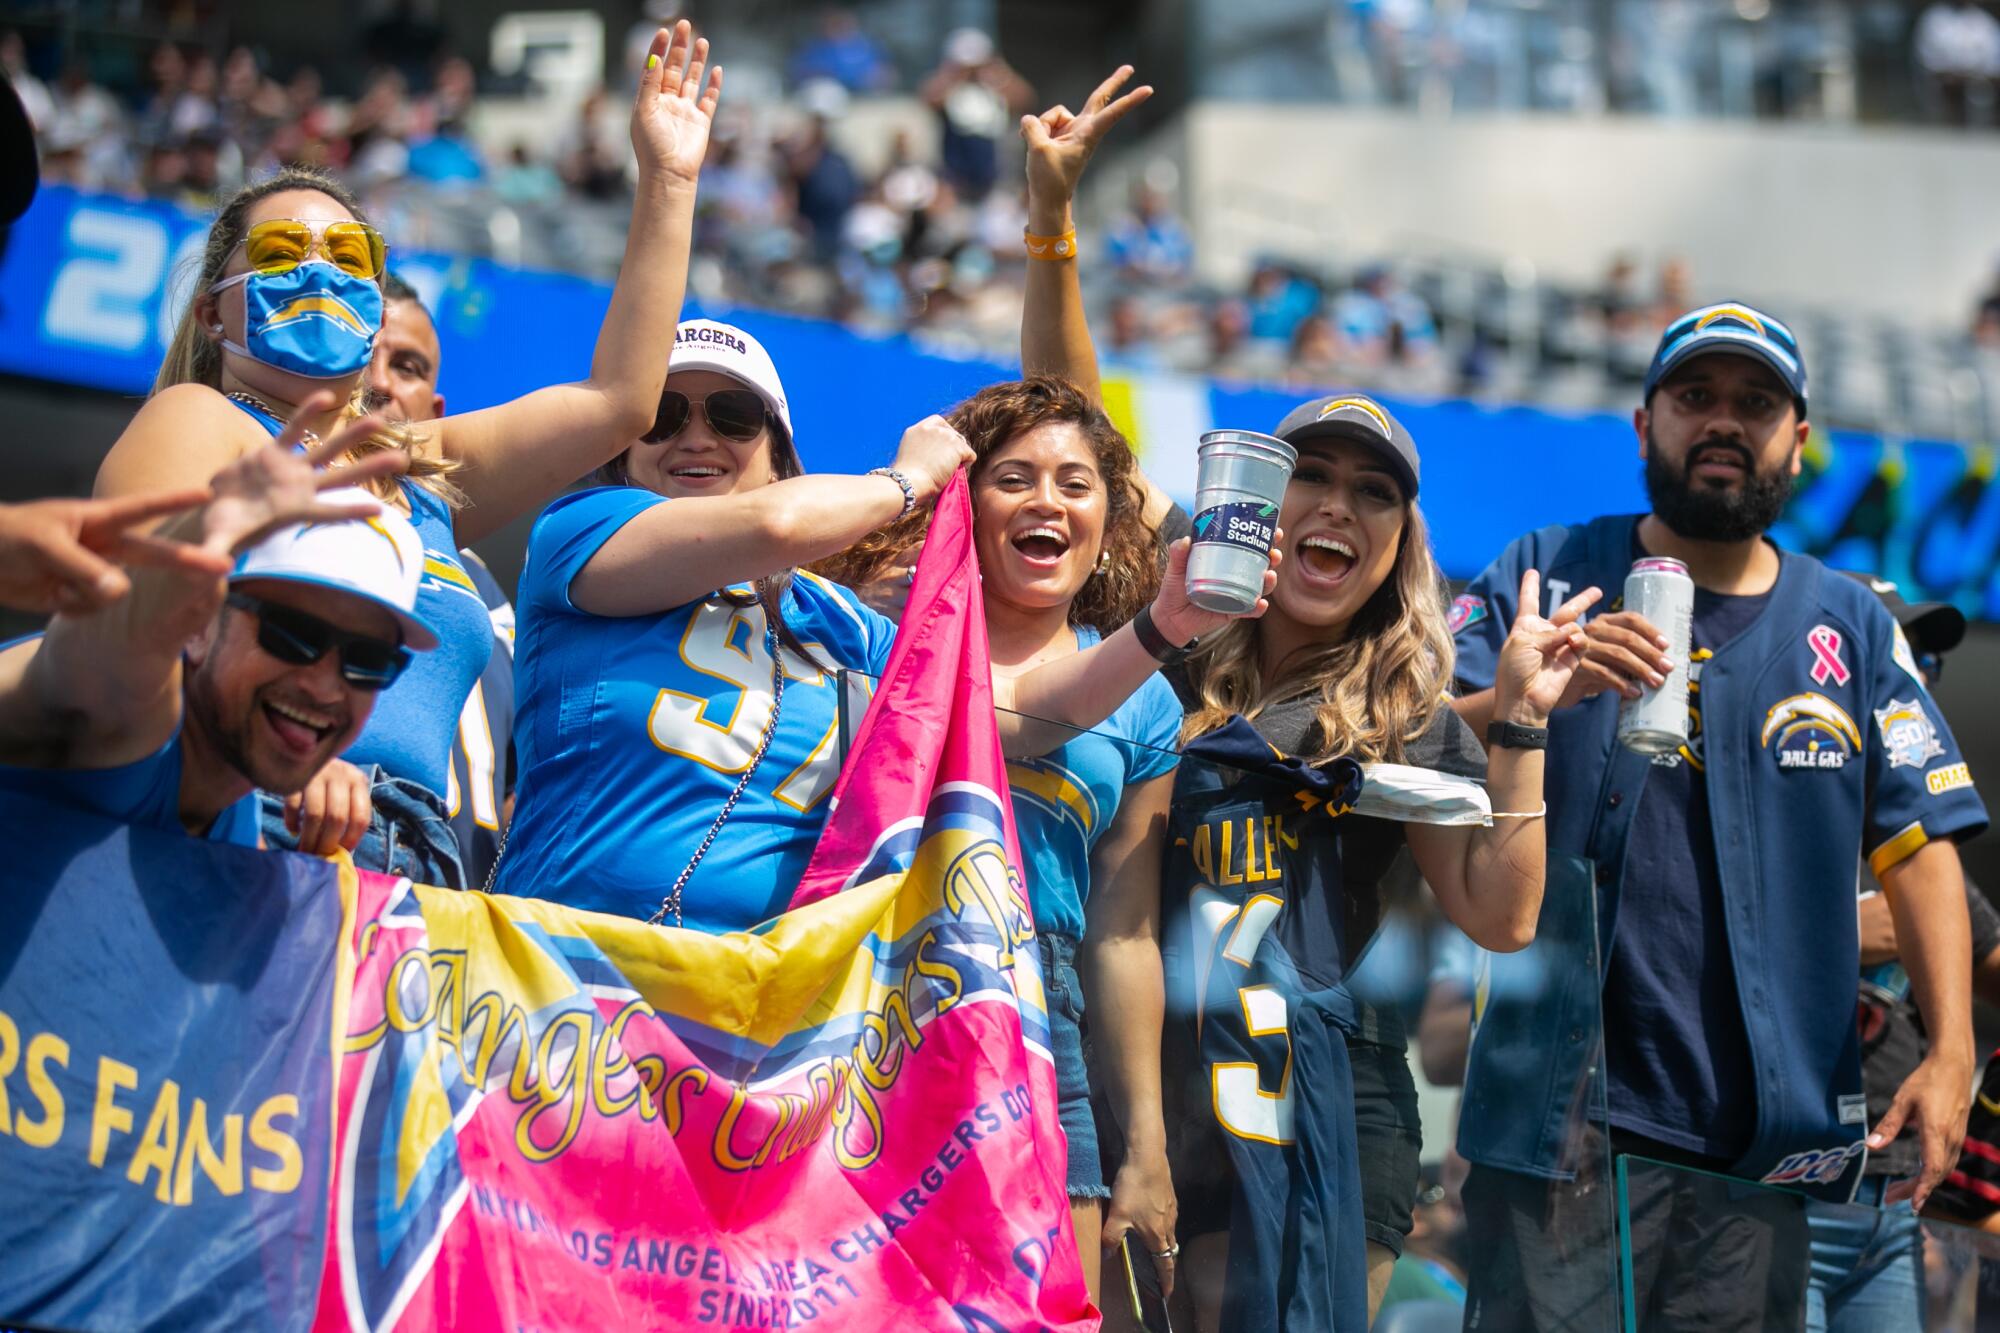 Fans enjoy a day at SoFi Stadium for the Chargers Fan Fest and open practice.